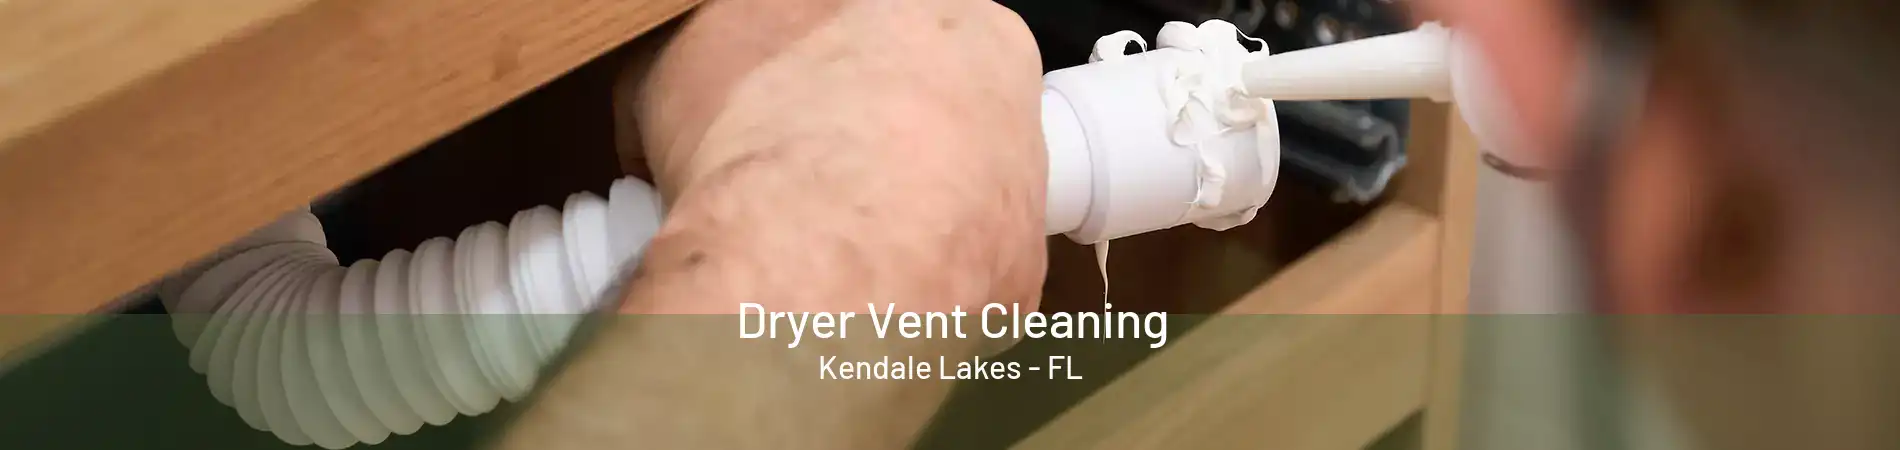 Dryer Vent Cleaning Kendale Lakes - FL